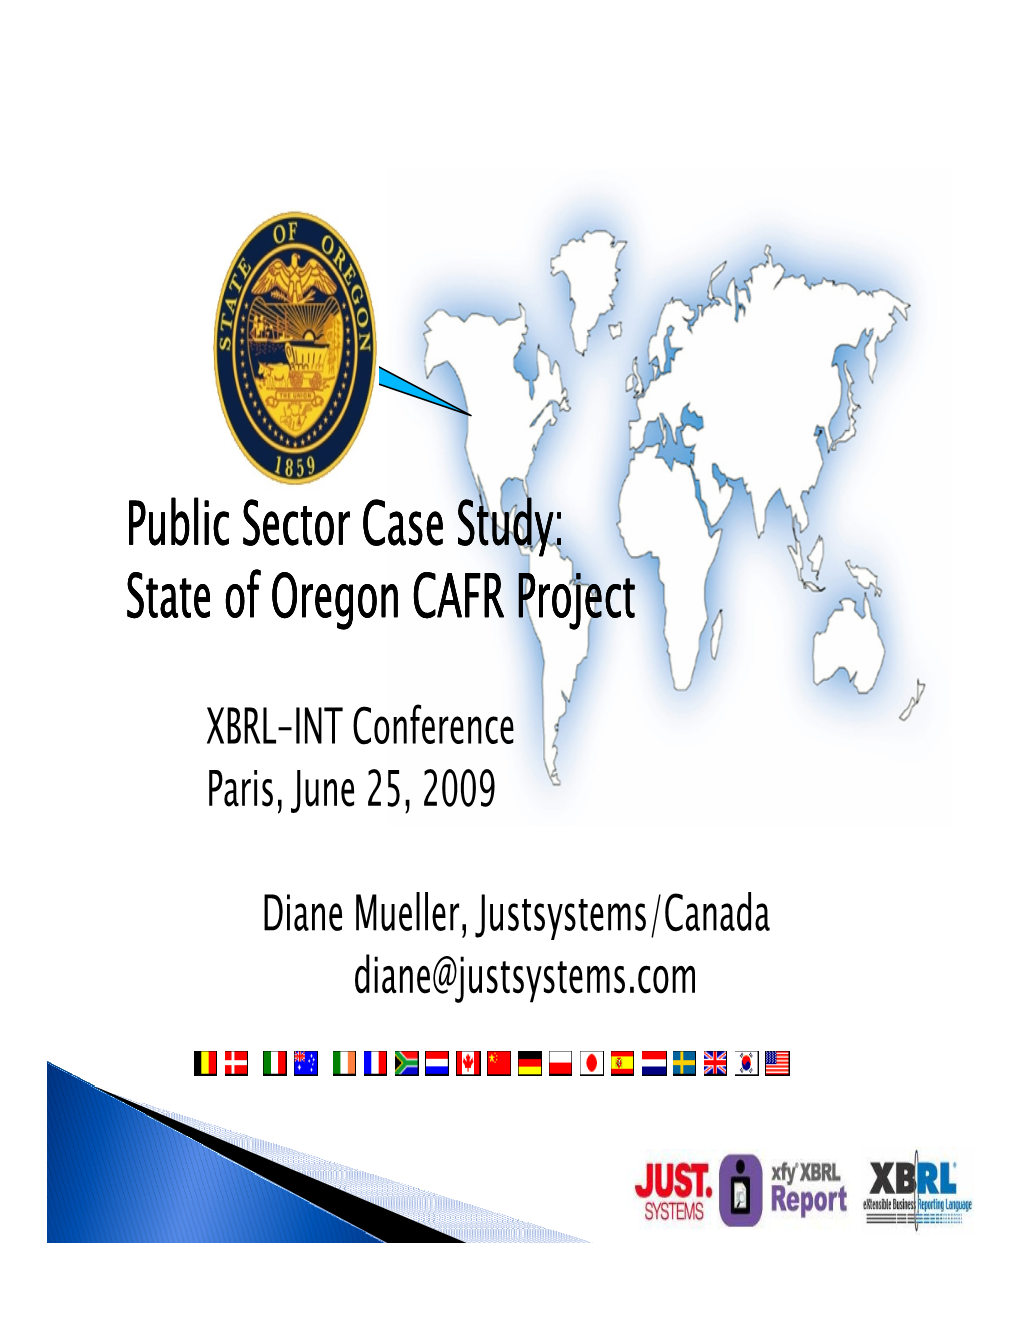 Public Sector Case Study: State of Oregon CAFR Project